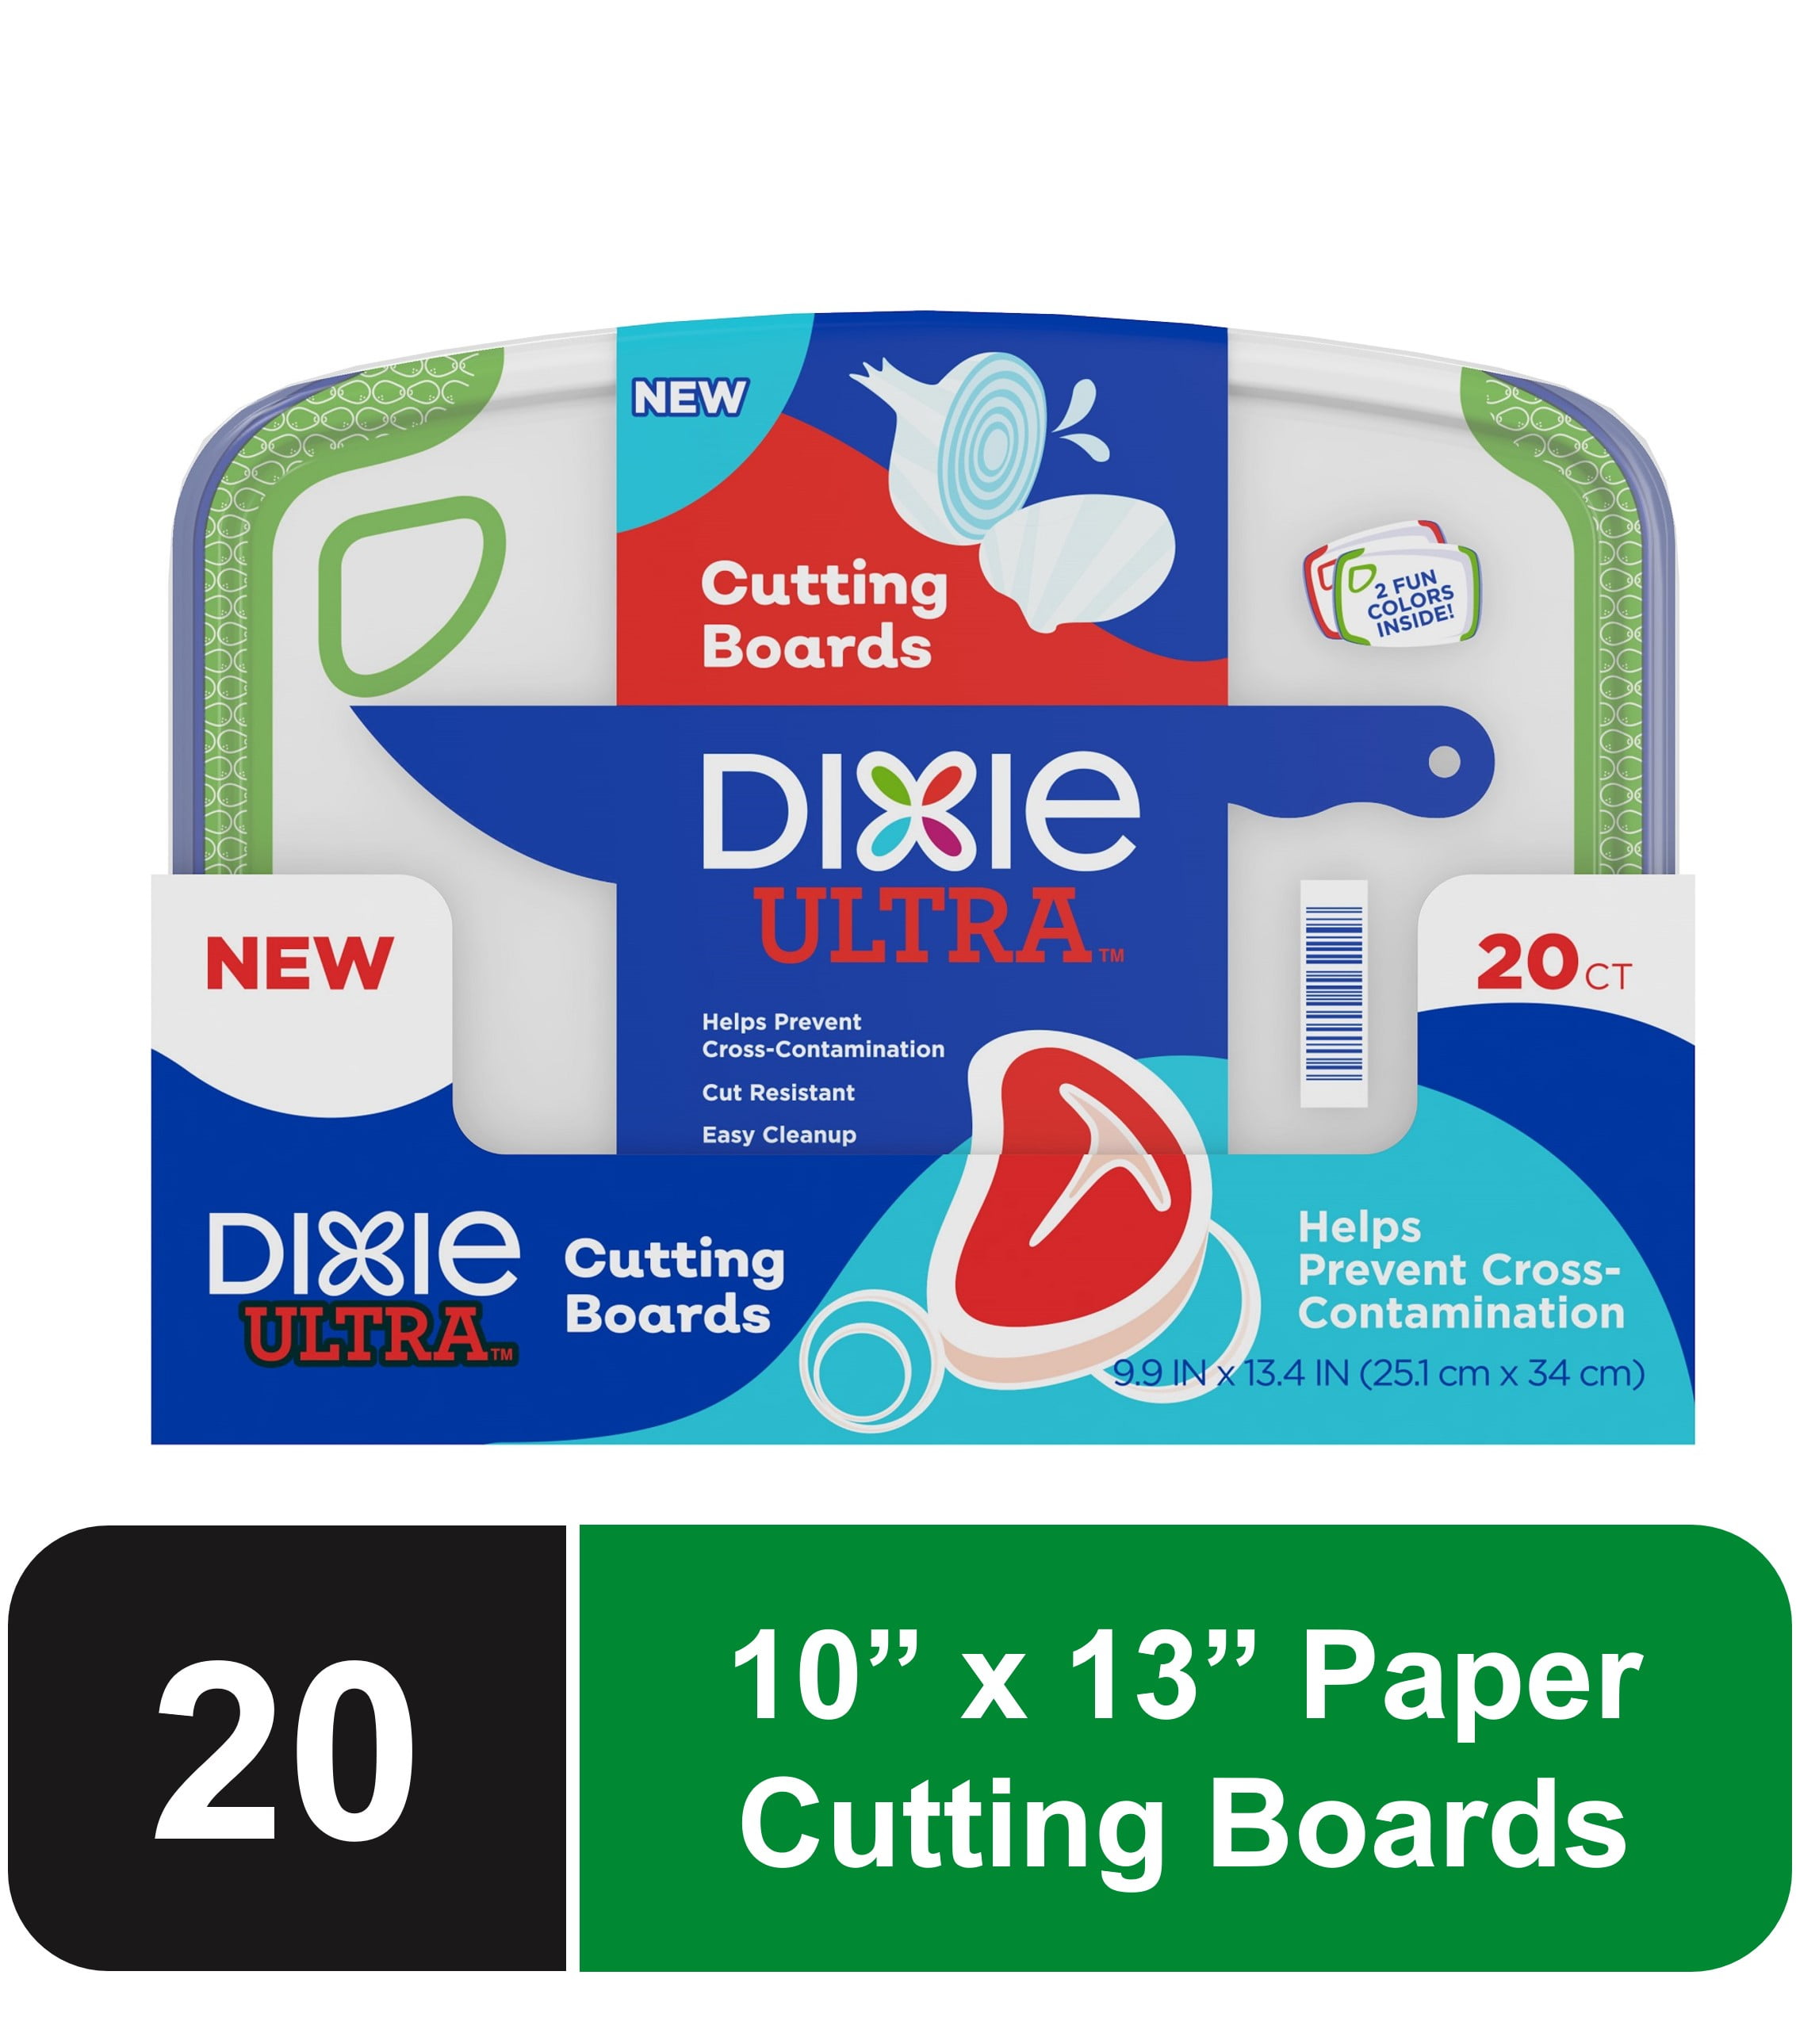 New Product Alert! Paper Cutting Boards!